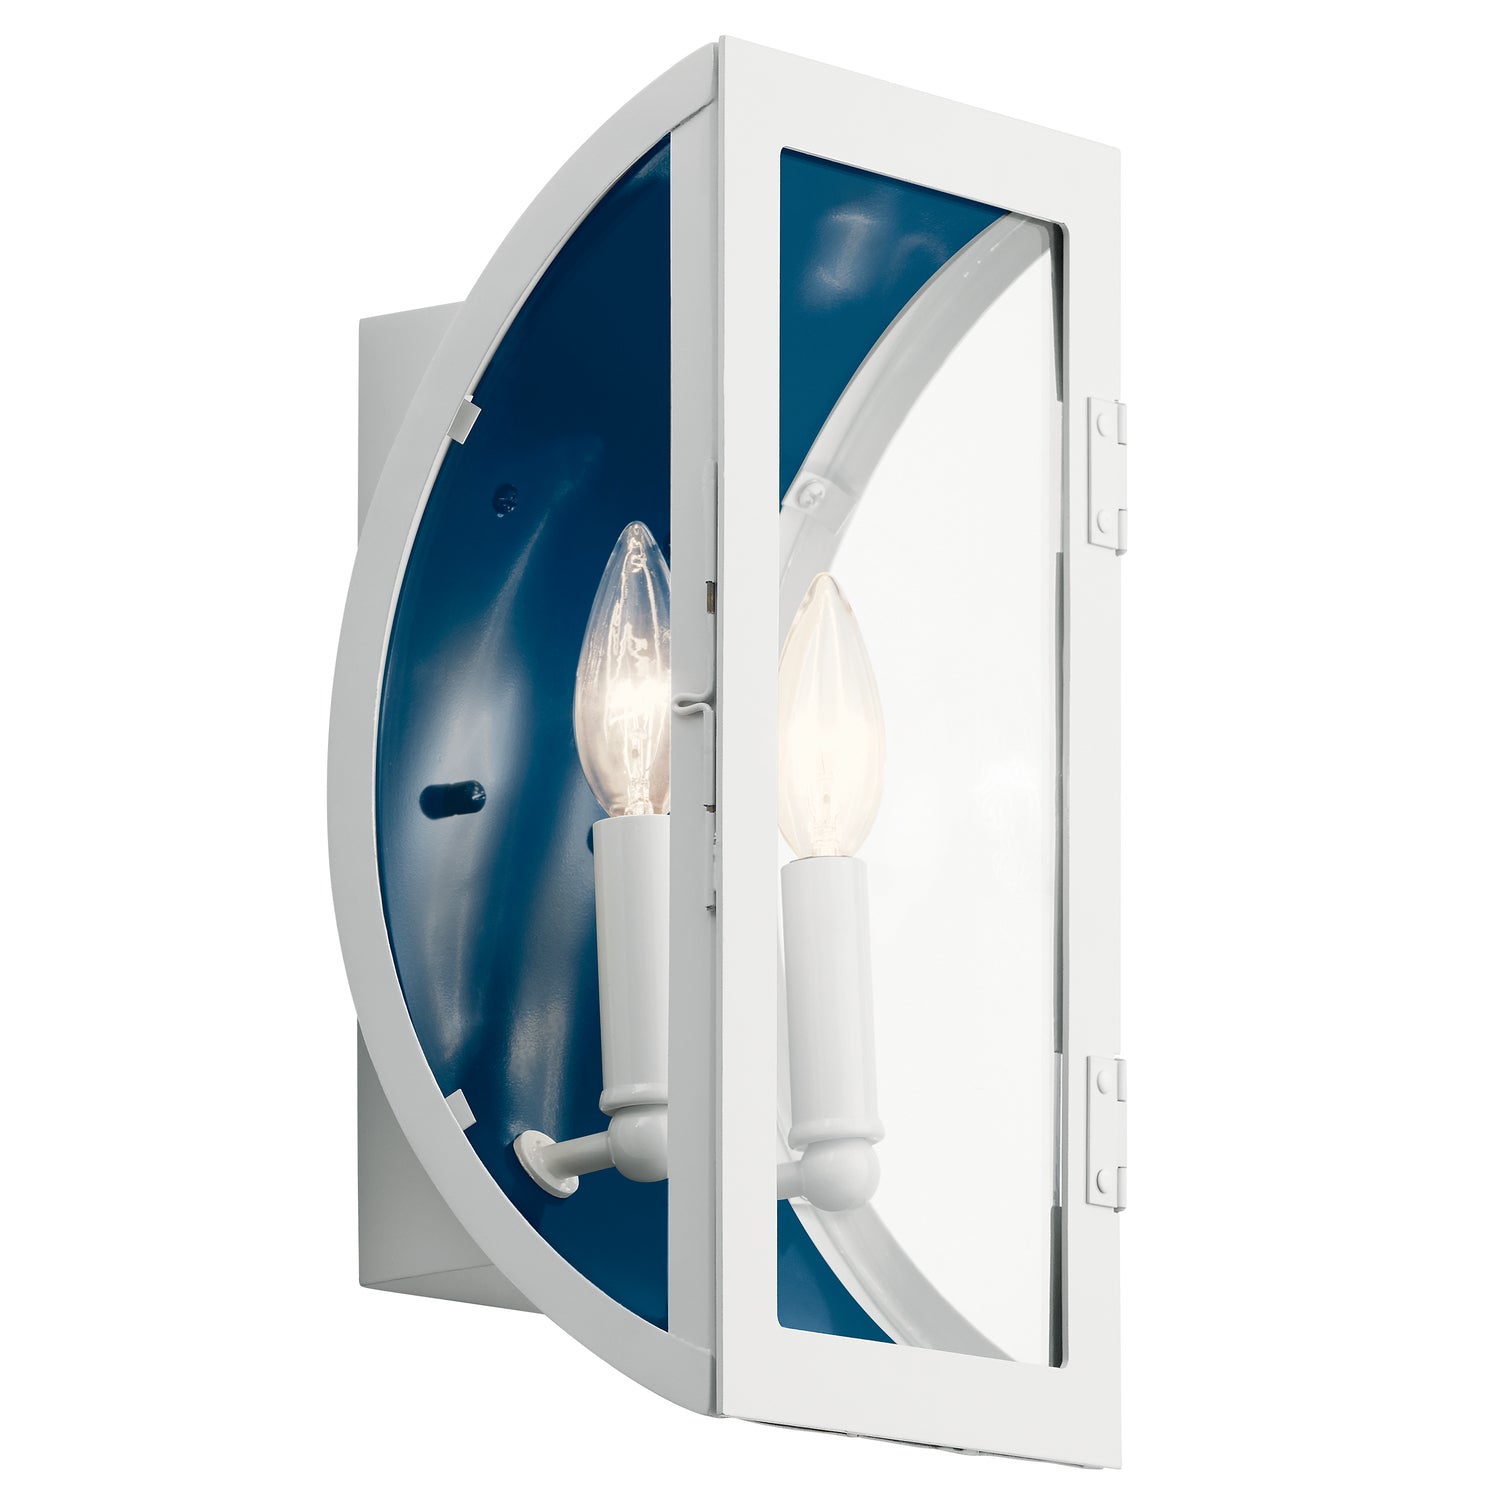 Narelle Outdoor Wall Light White